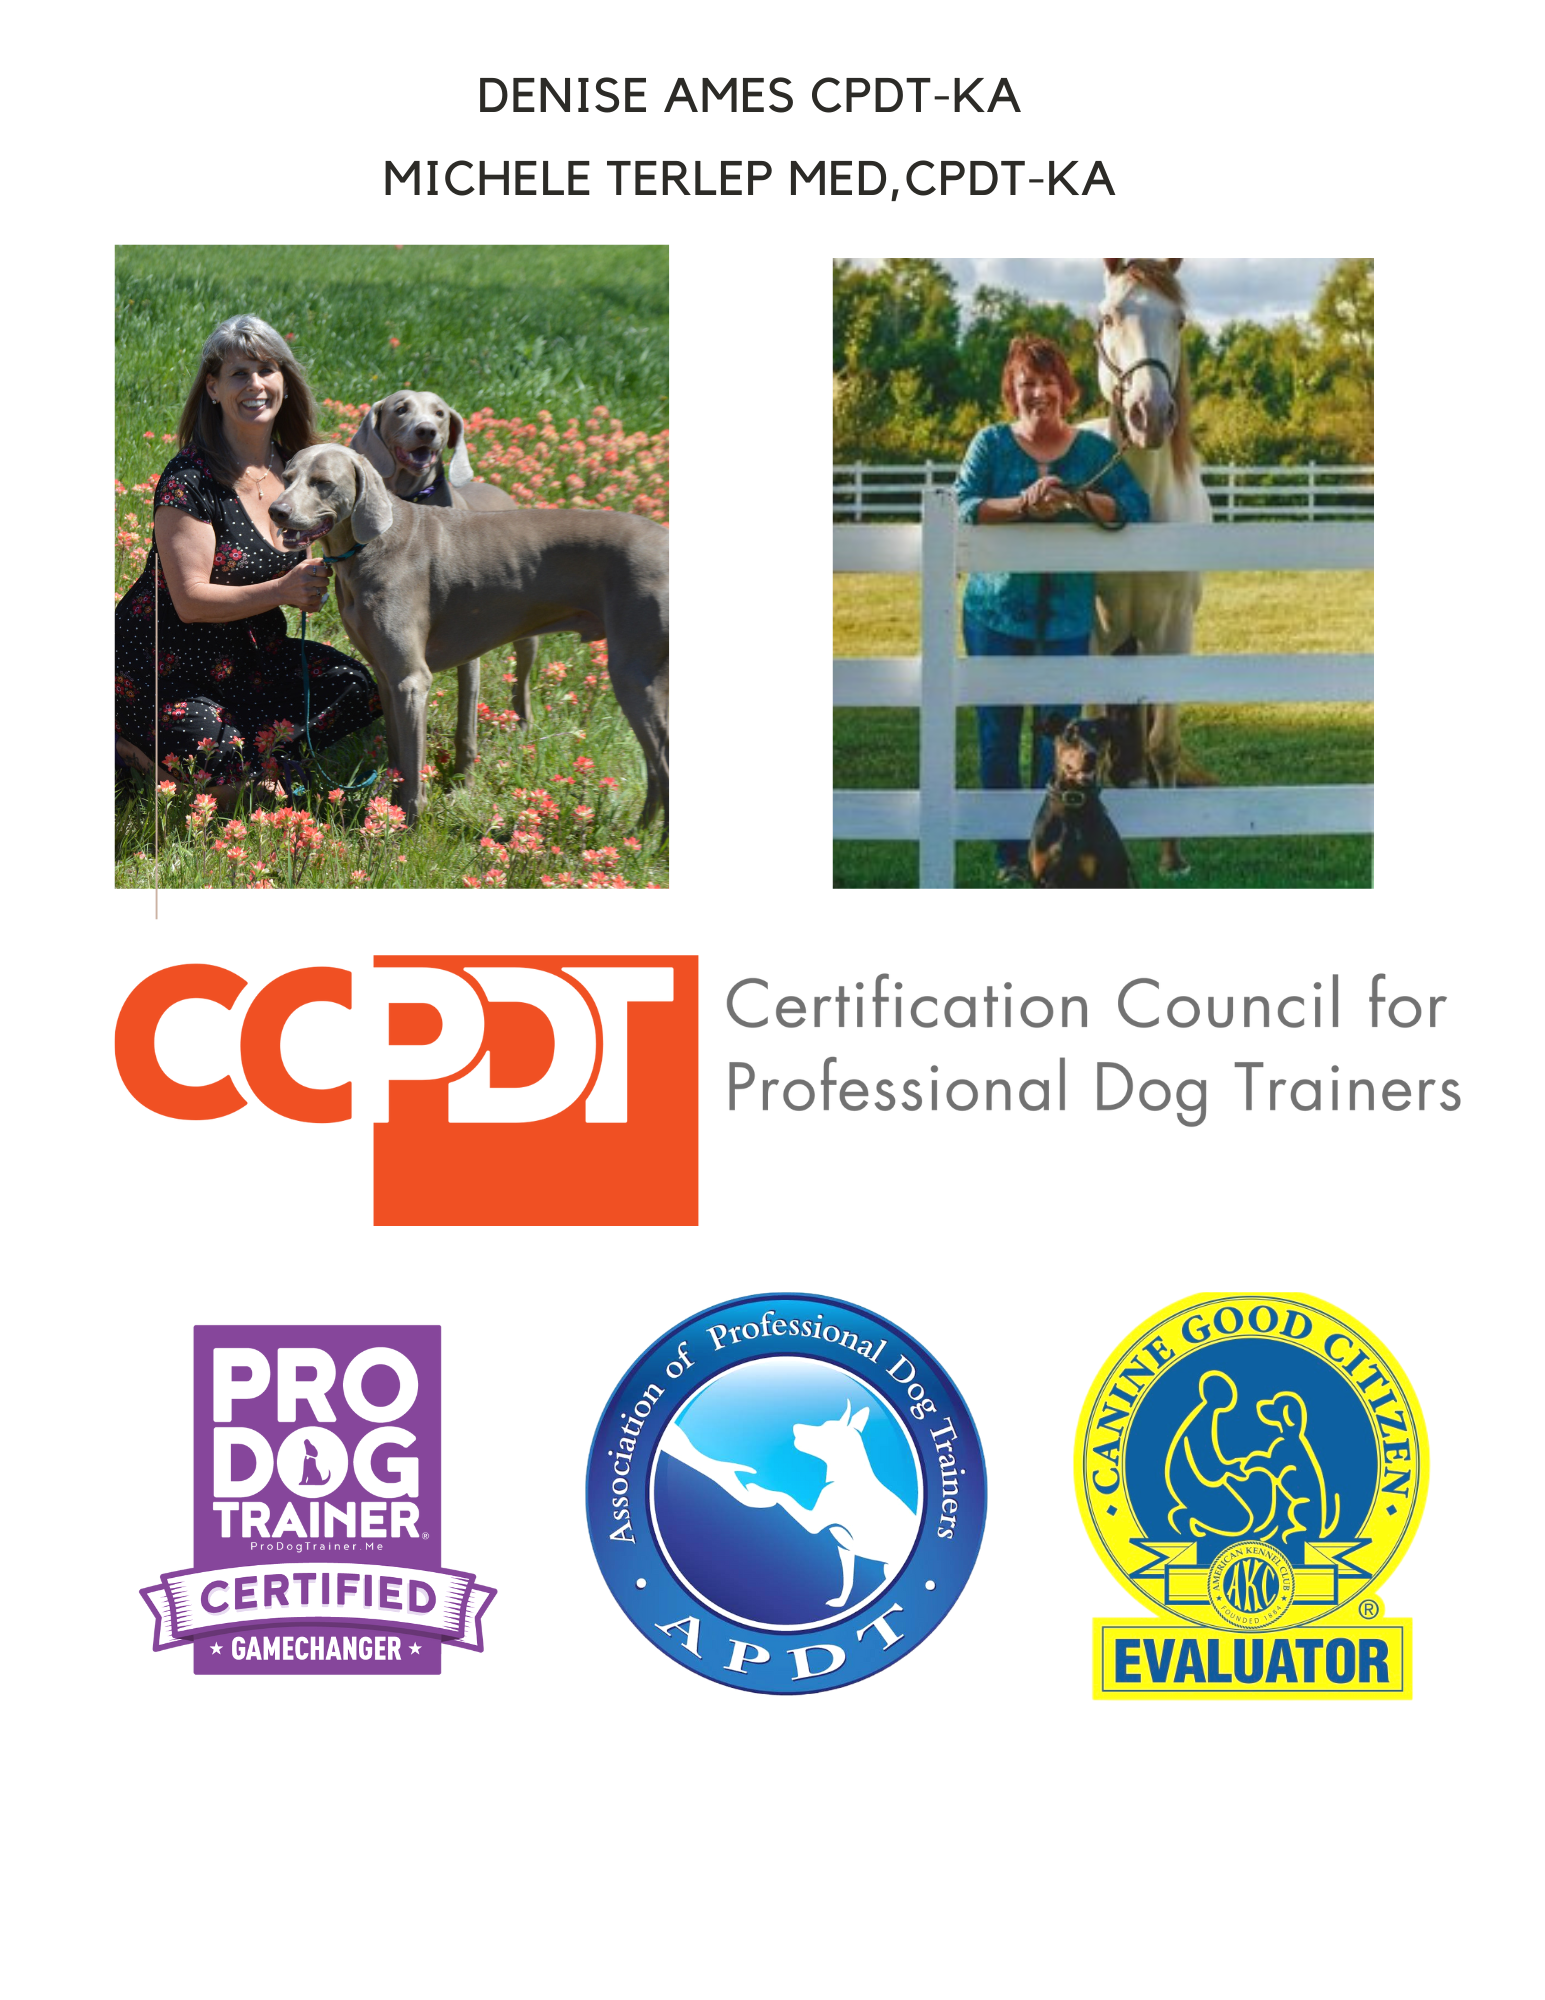 Certified Professional Dog Trainer